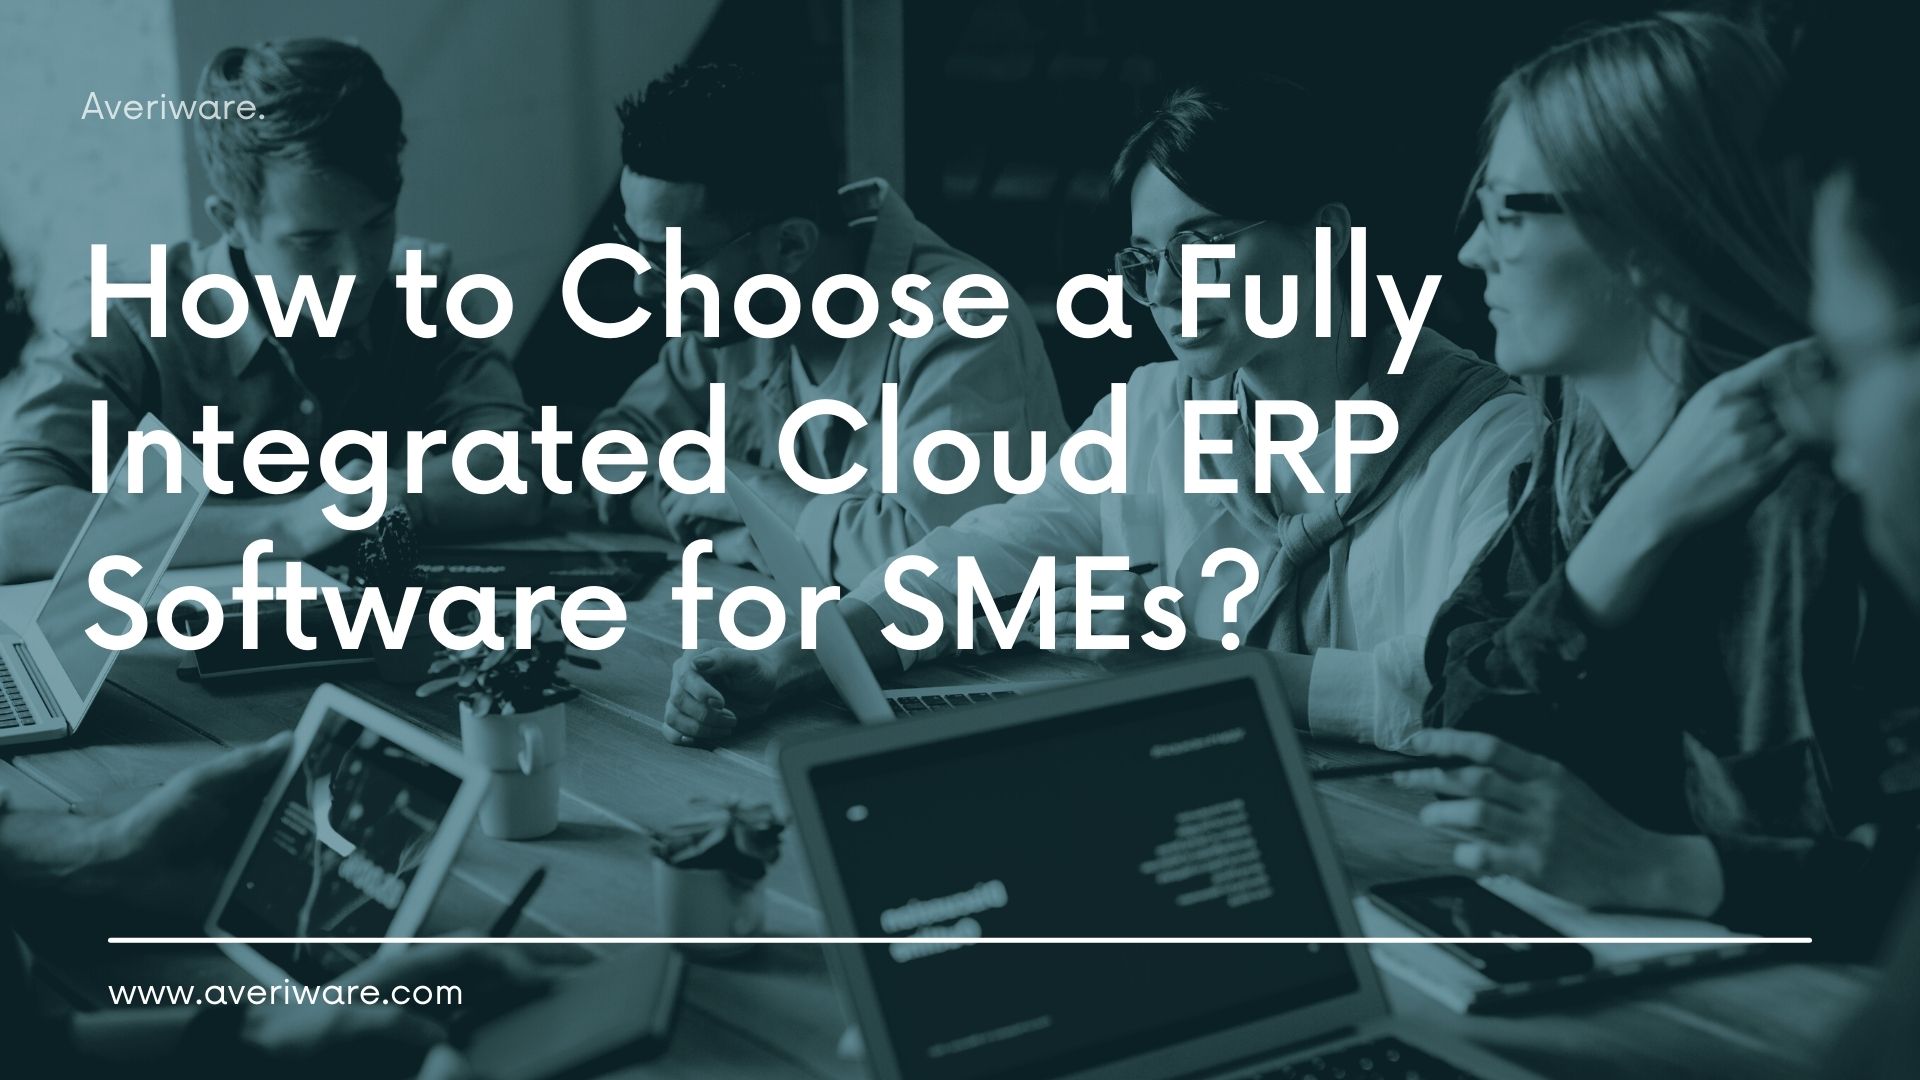 How to Choose a Fully Integrated Cloud ERP Software for SMEs?